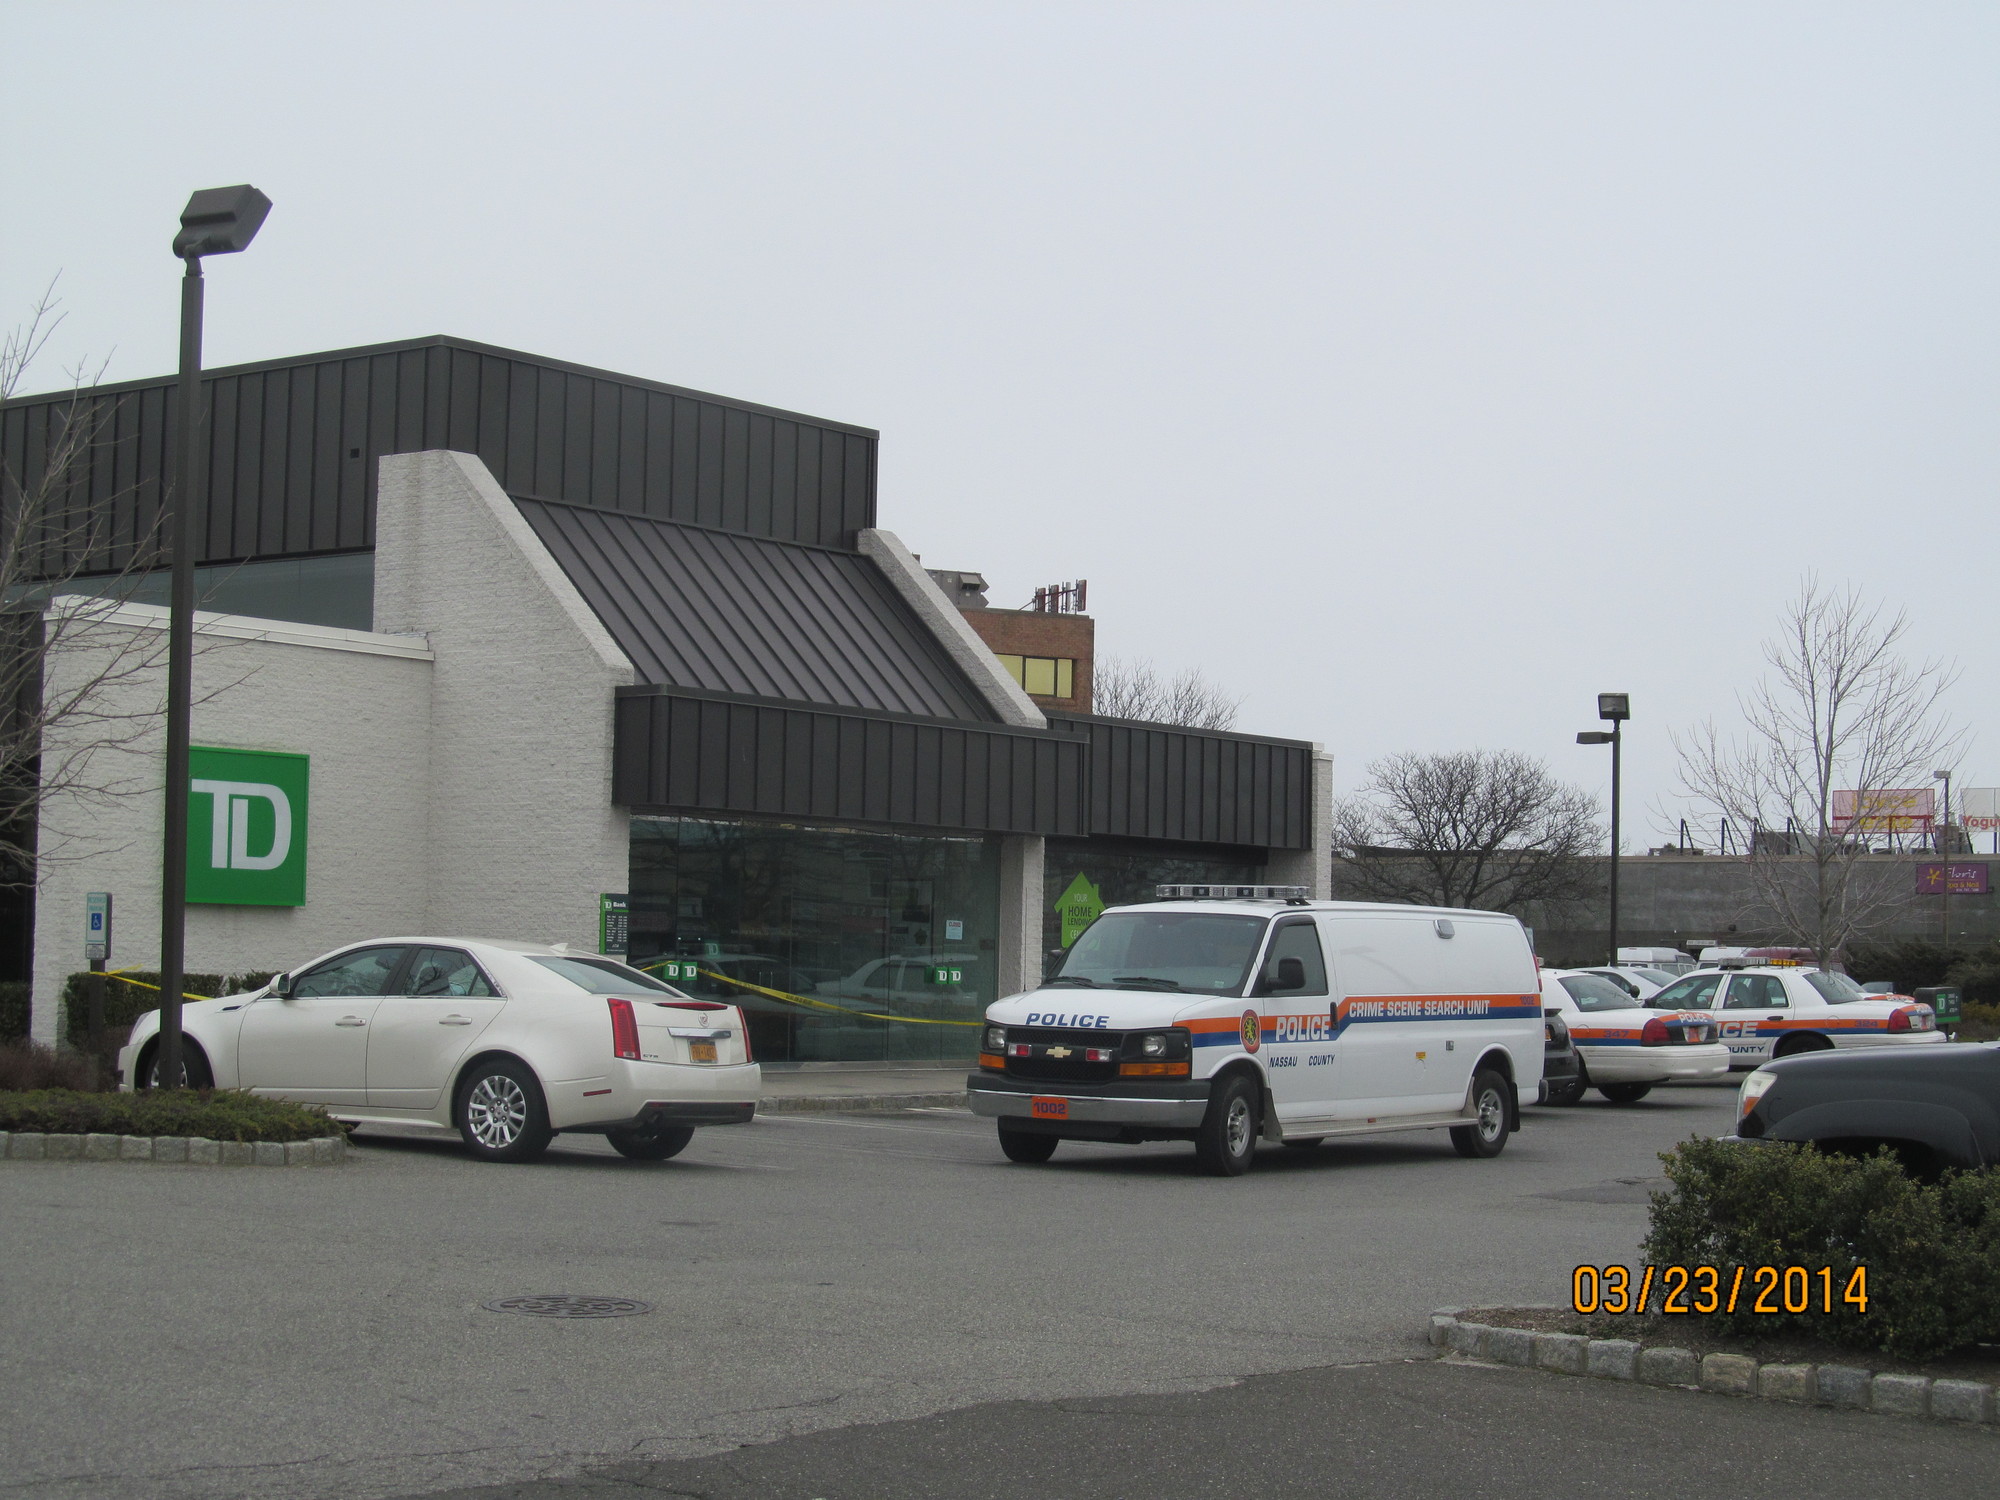 After robbing TD Bank Sunday, police say a woman fled in a “dark colored” car.